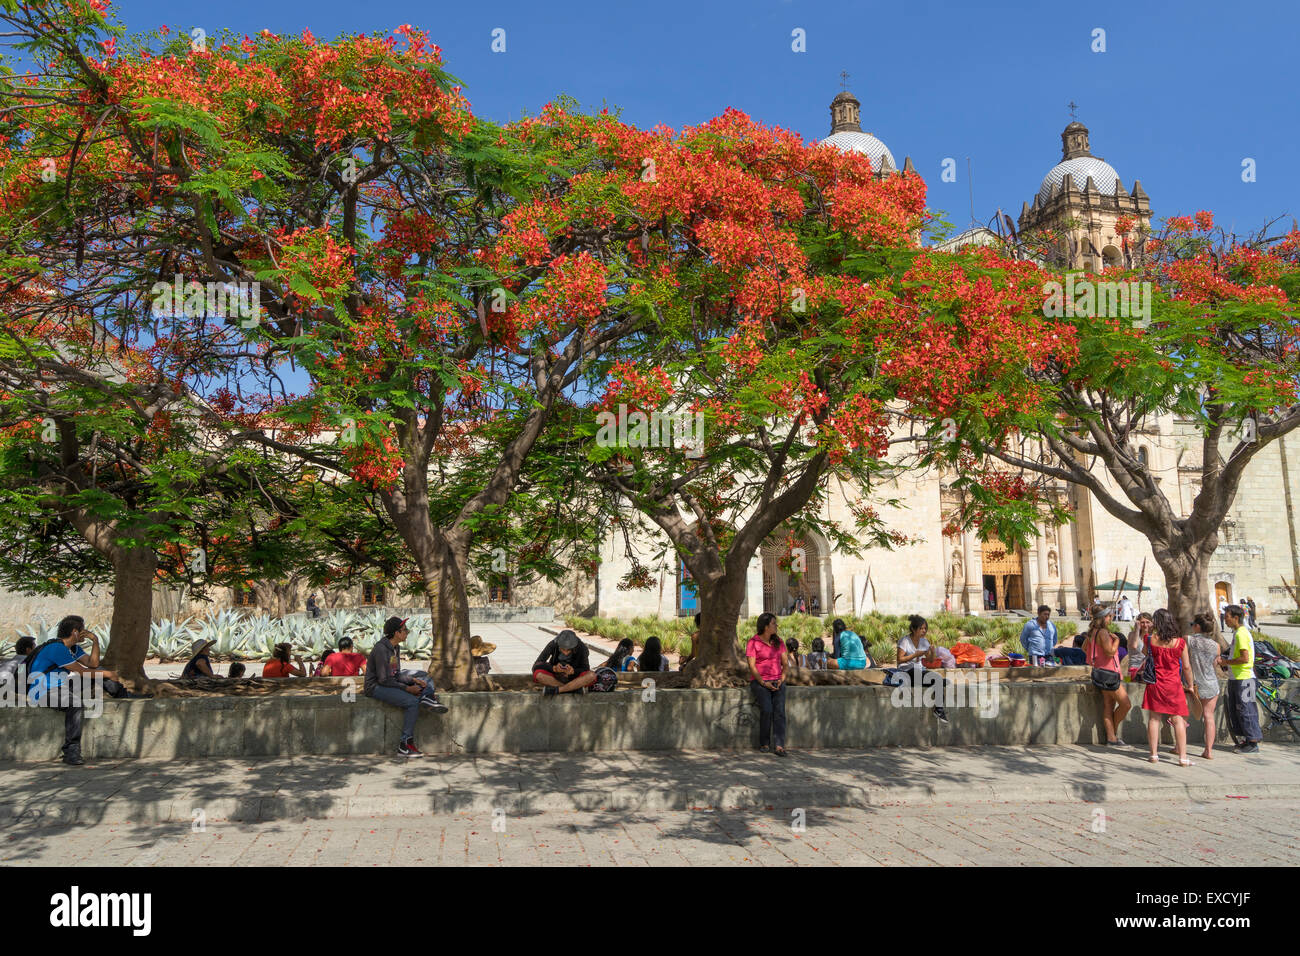 People relaxing in the shade of the trees in front of the Santo Domingo Church in Oaxaca Mexico Stock Photo